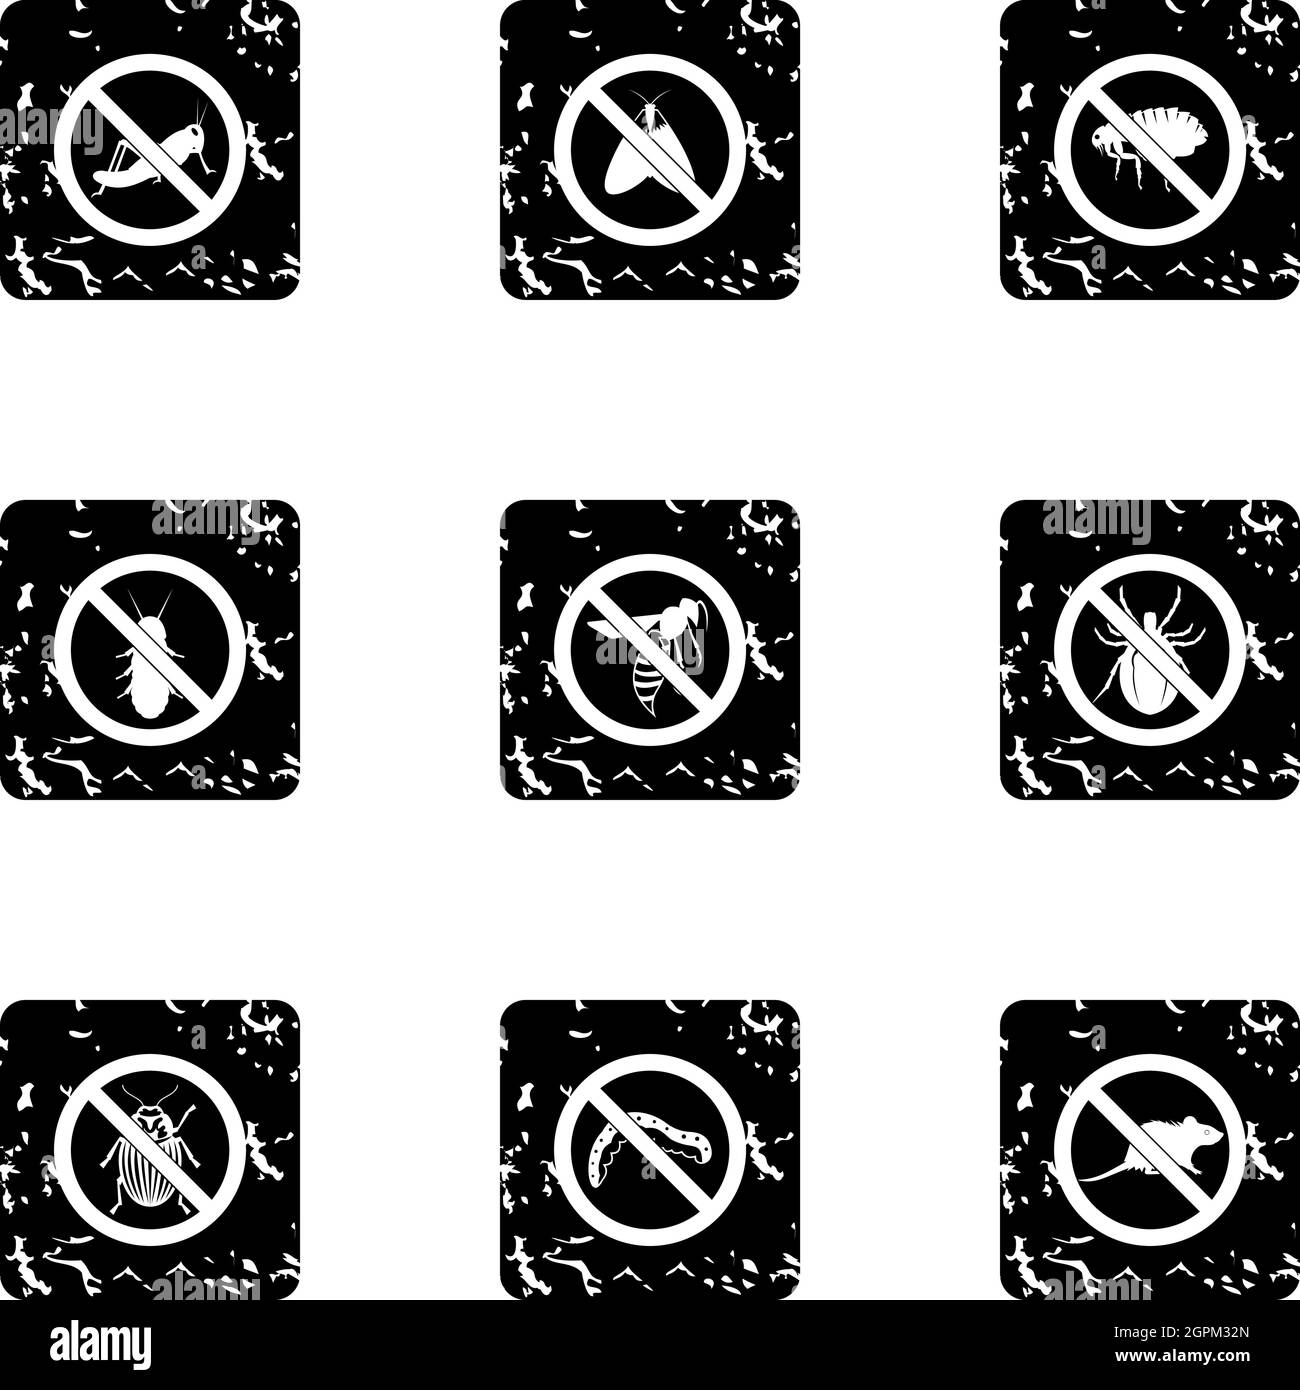 No insects icons set, grunge style Stock Vector